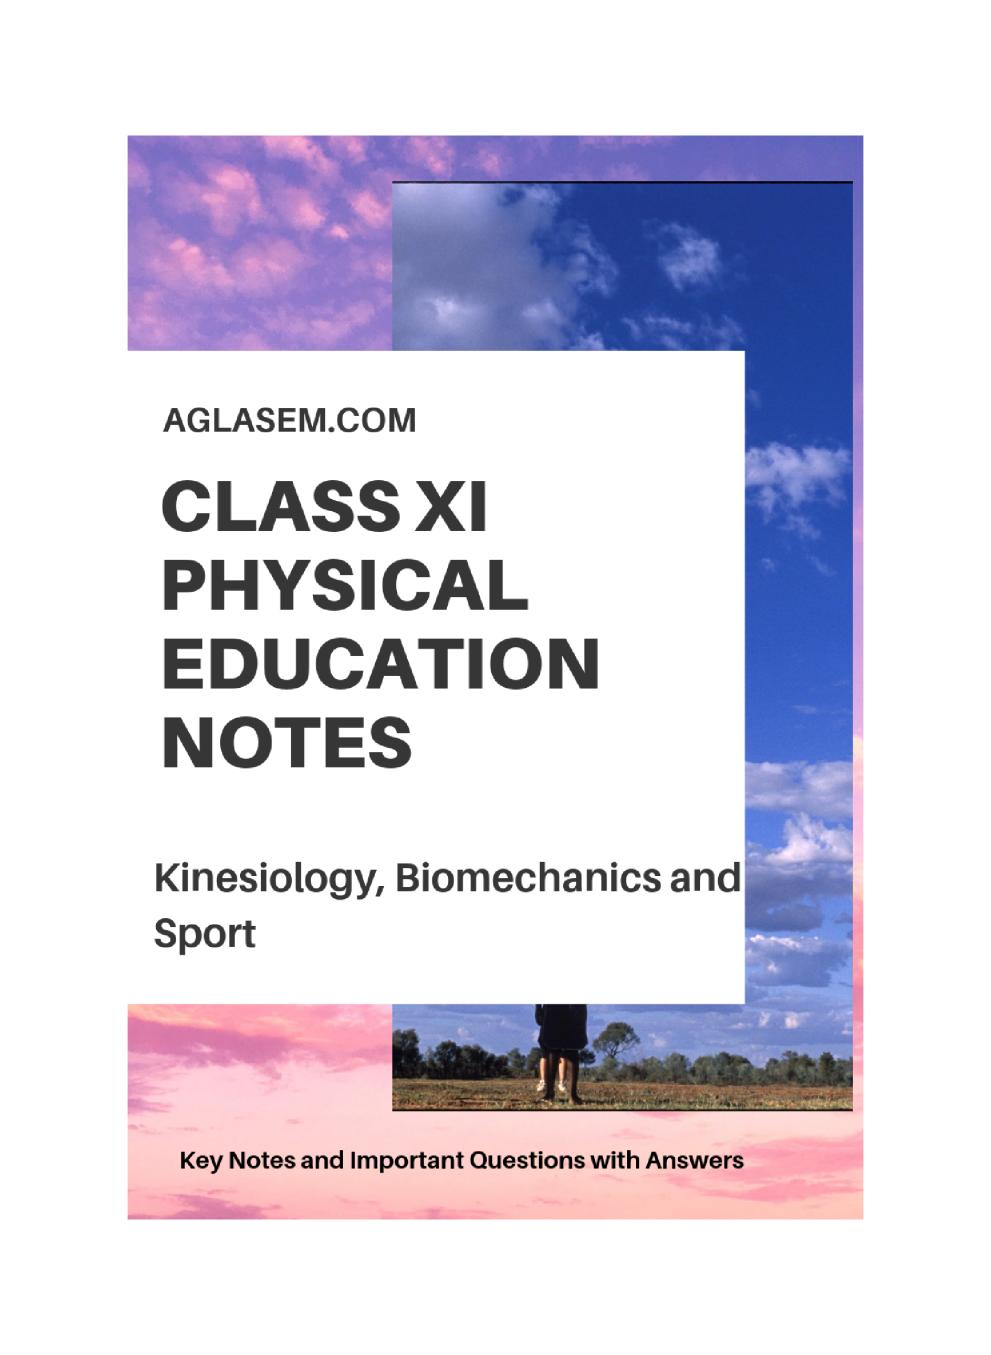 Class 11 Physical Education Notes for Kinesiology, Biomechanics and Sports - Page 1